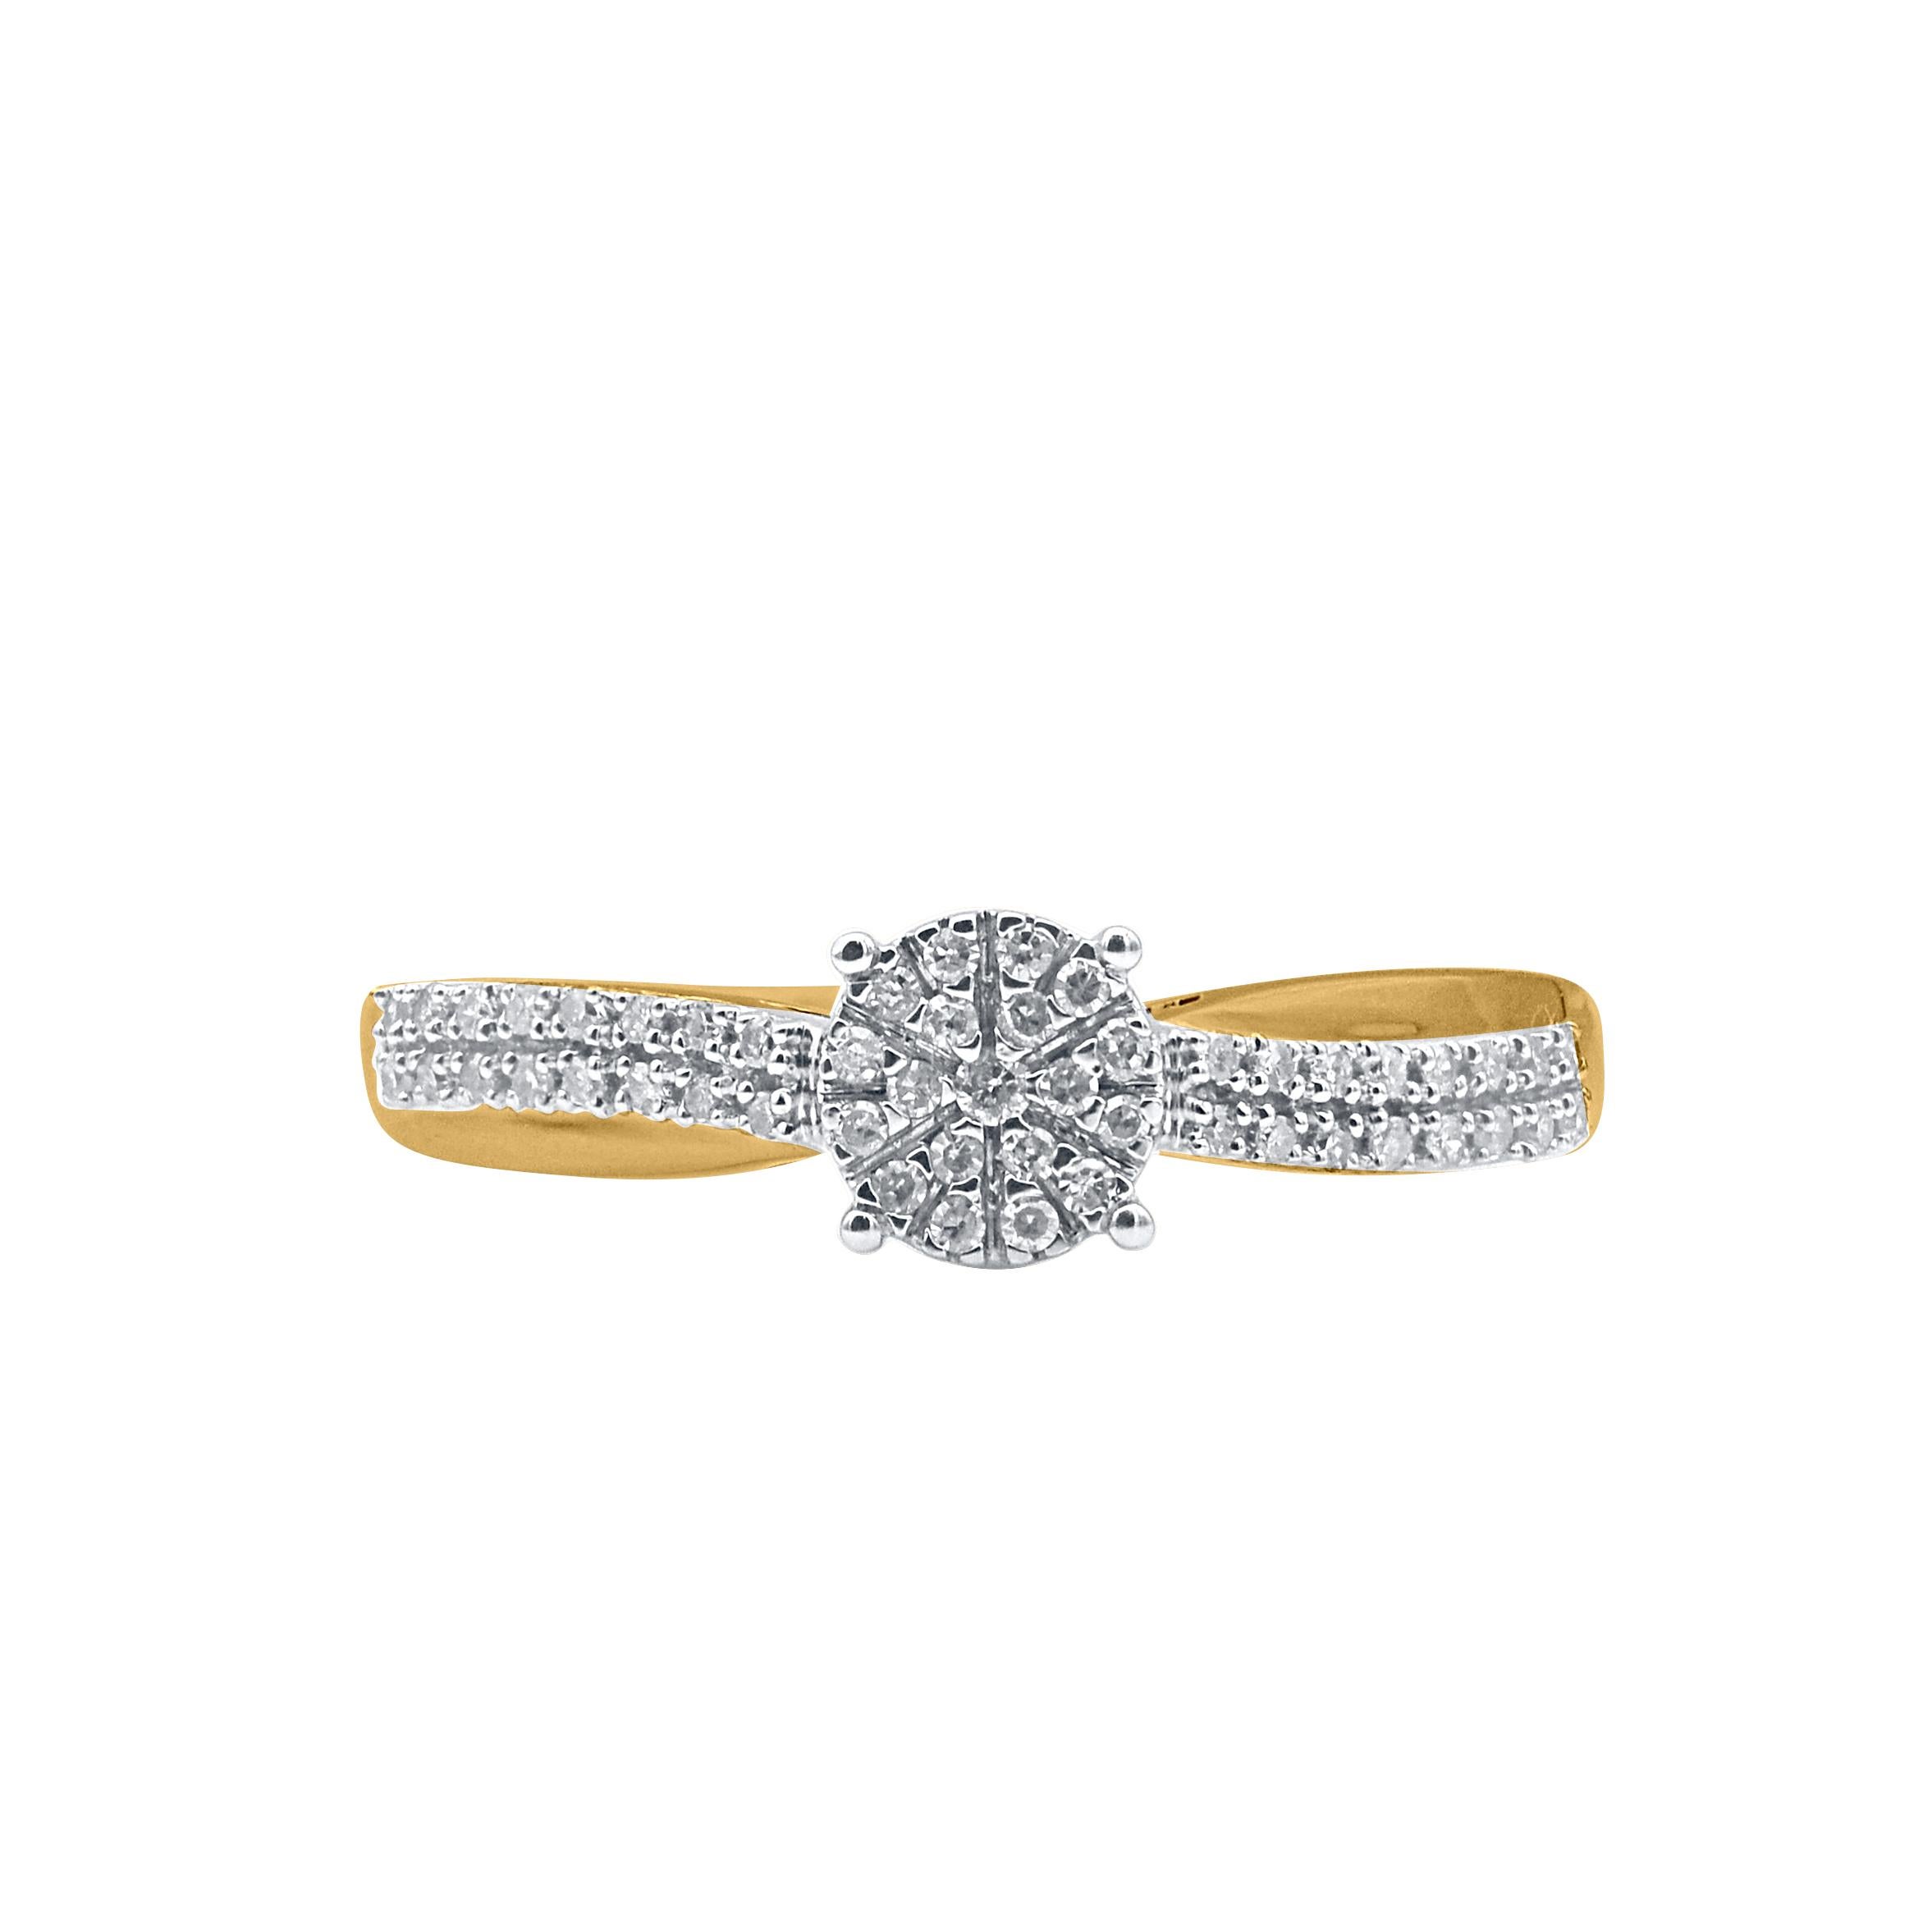 Complete your bridal look with a timeless design. These band ring are studded with 51 round single cut & brilliant cut natural diamonds in Illusion & prong setting. The white diamonds are graded as H-I color and I-2 clarity.
